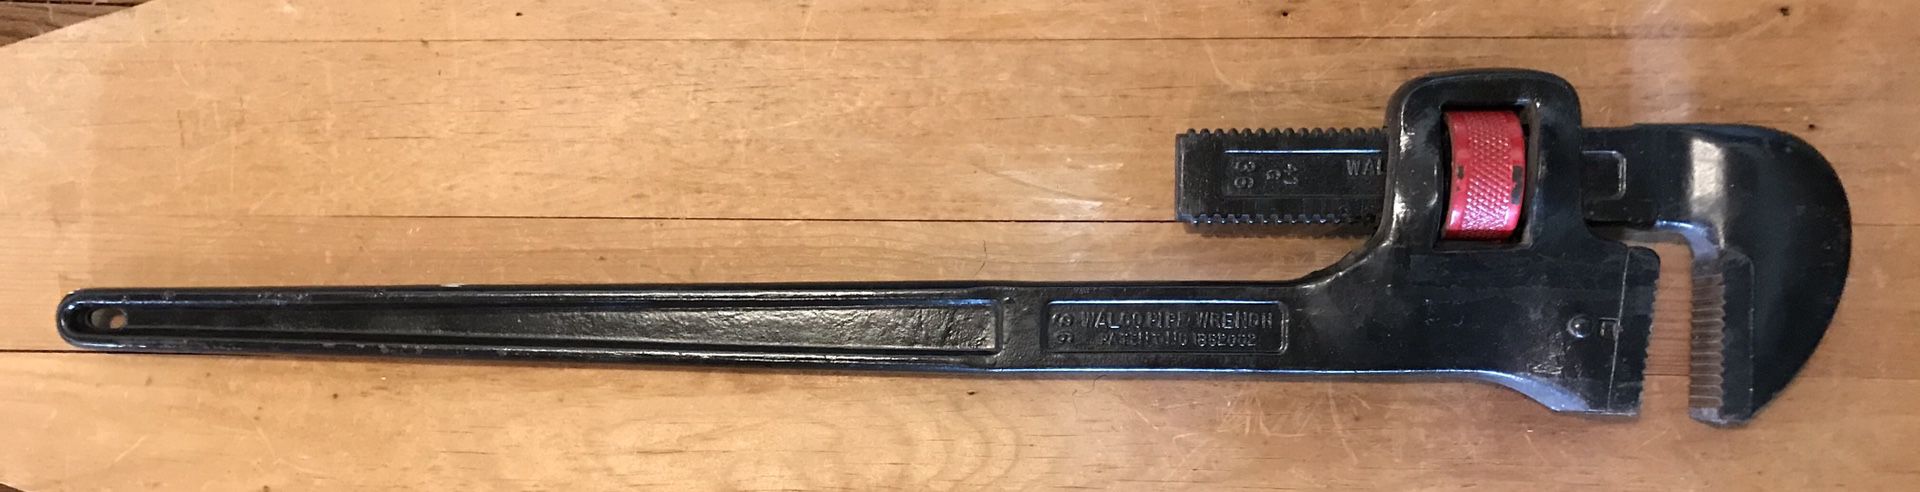 Pipe Wrench - Antique Cast Iron